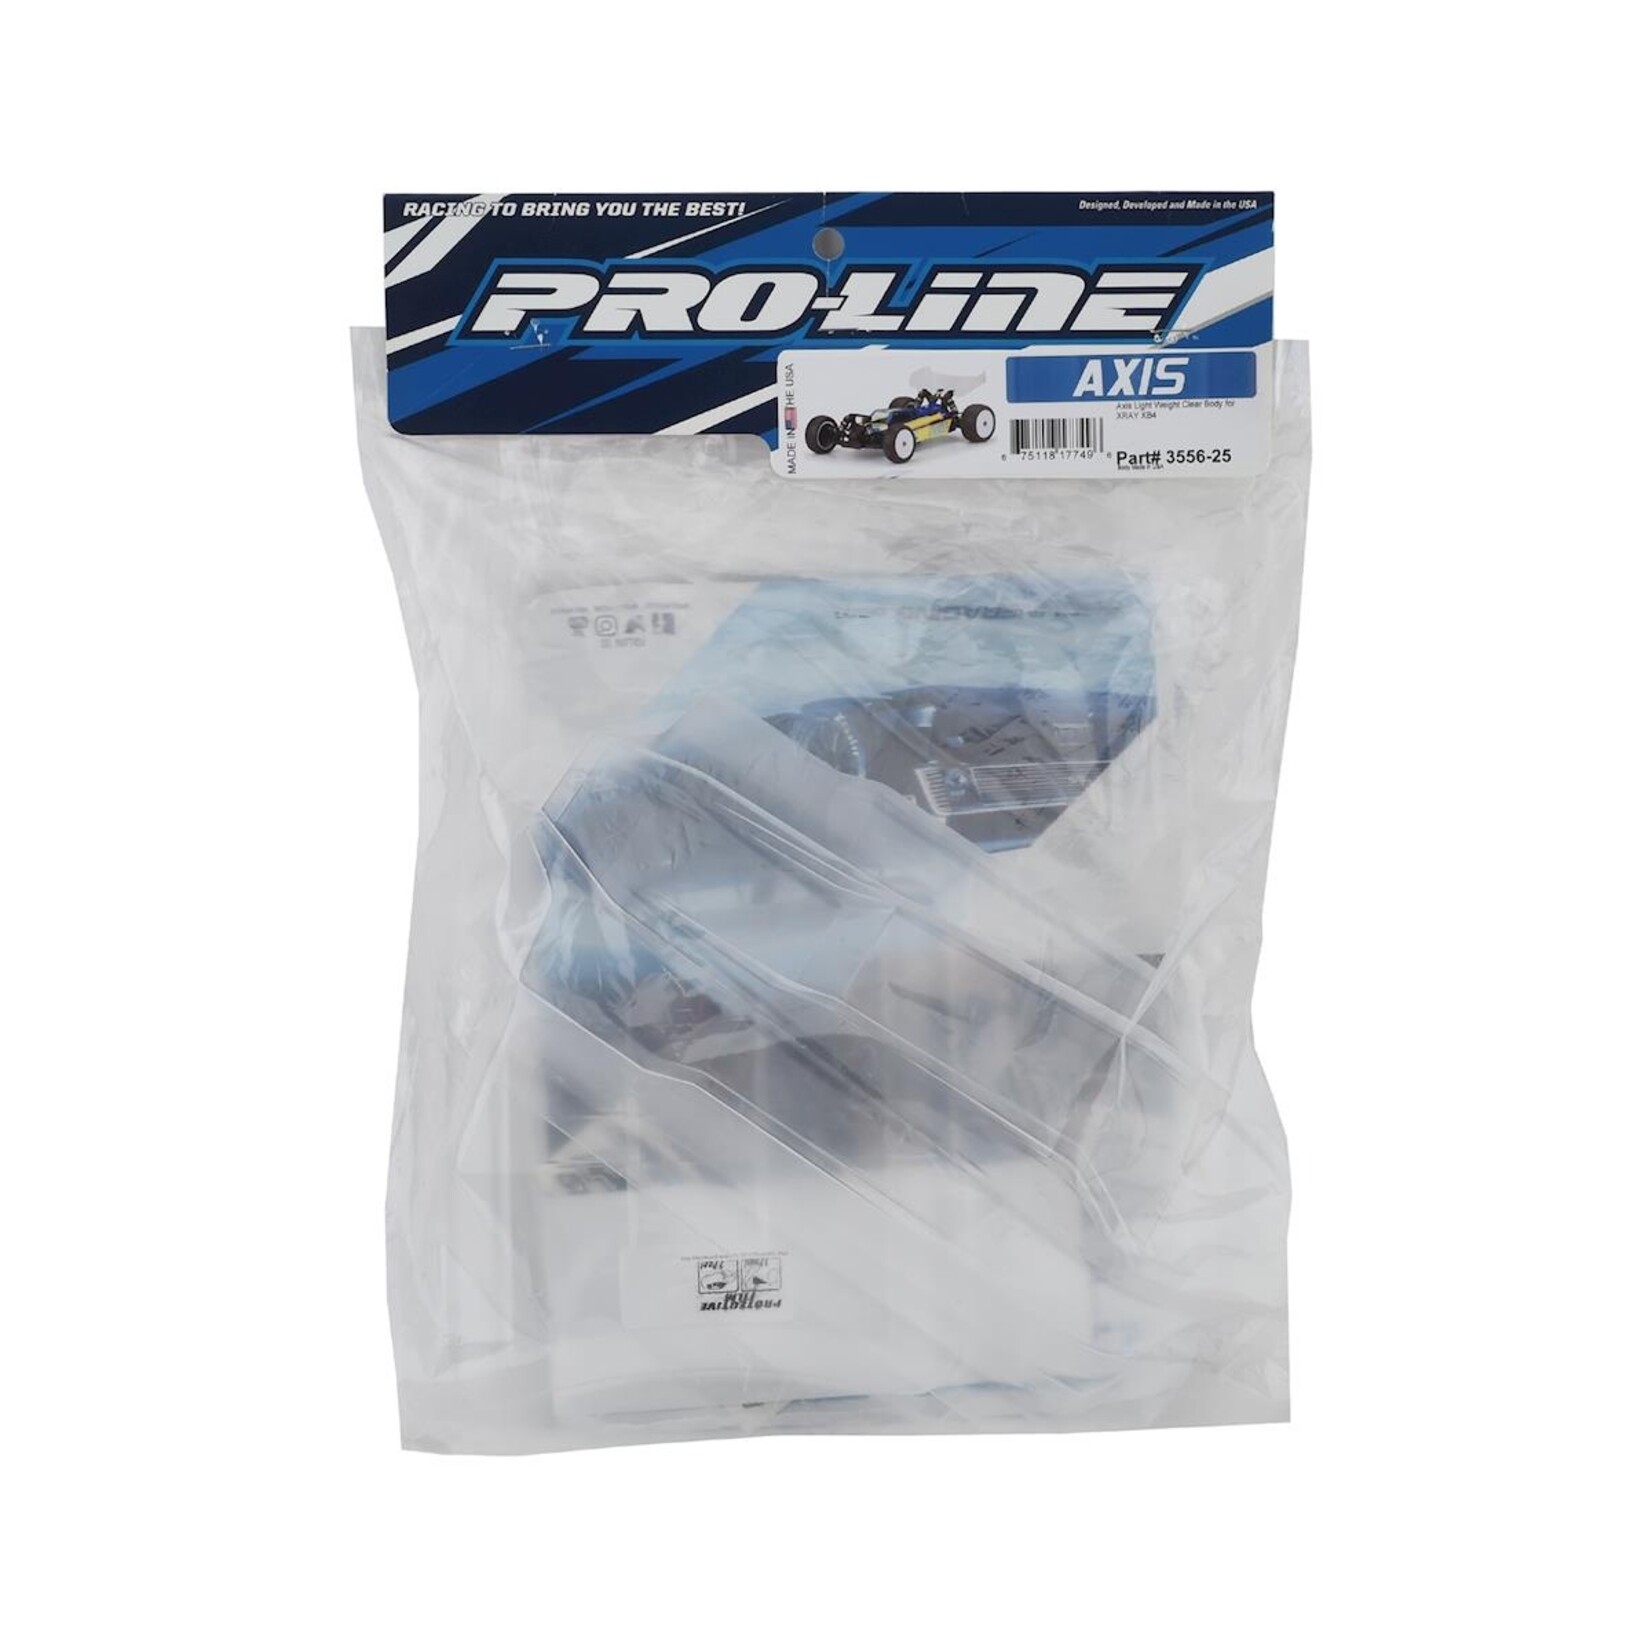 Pro-Line Pro-Line XRAY XB4 Lightweight Axis Body (Clear) #3556-25